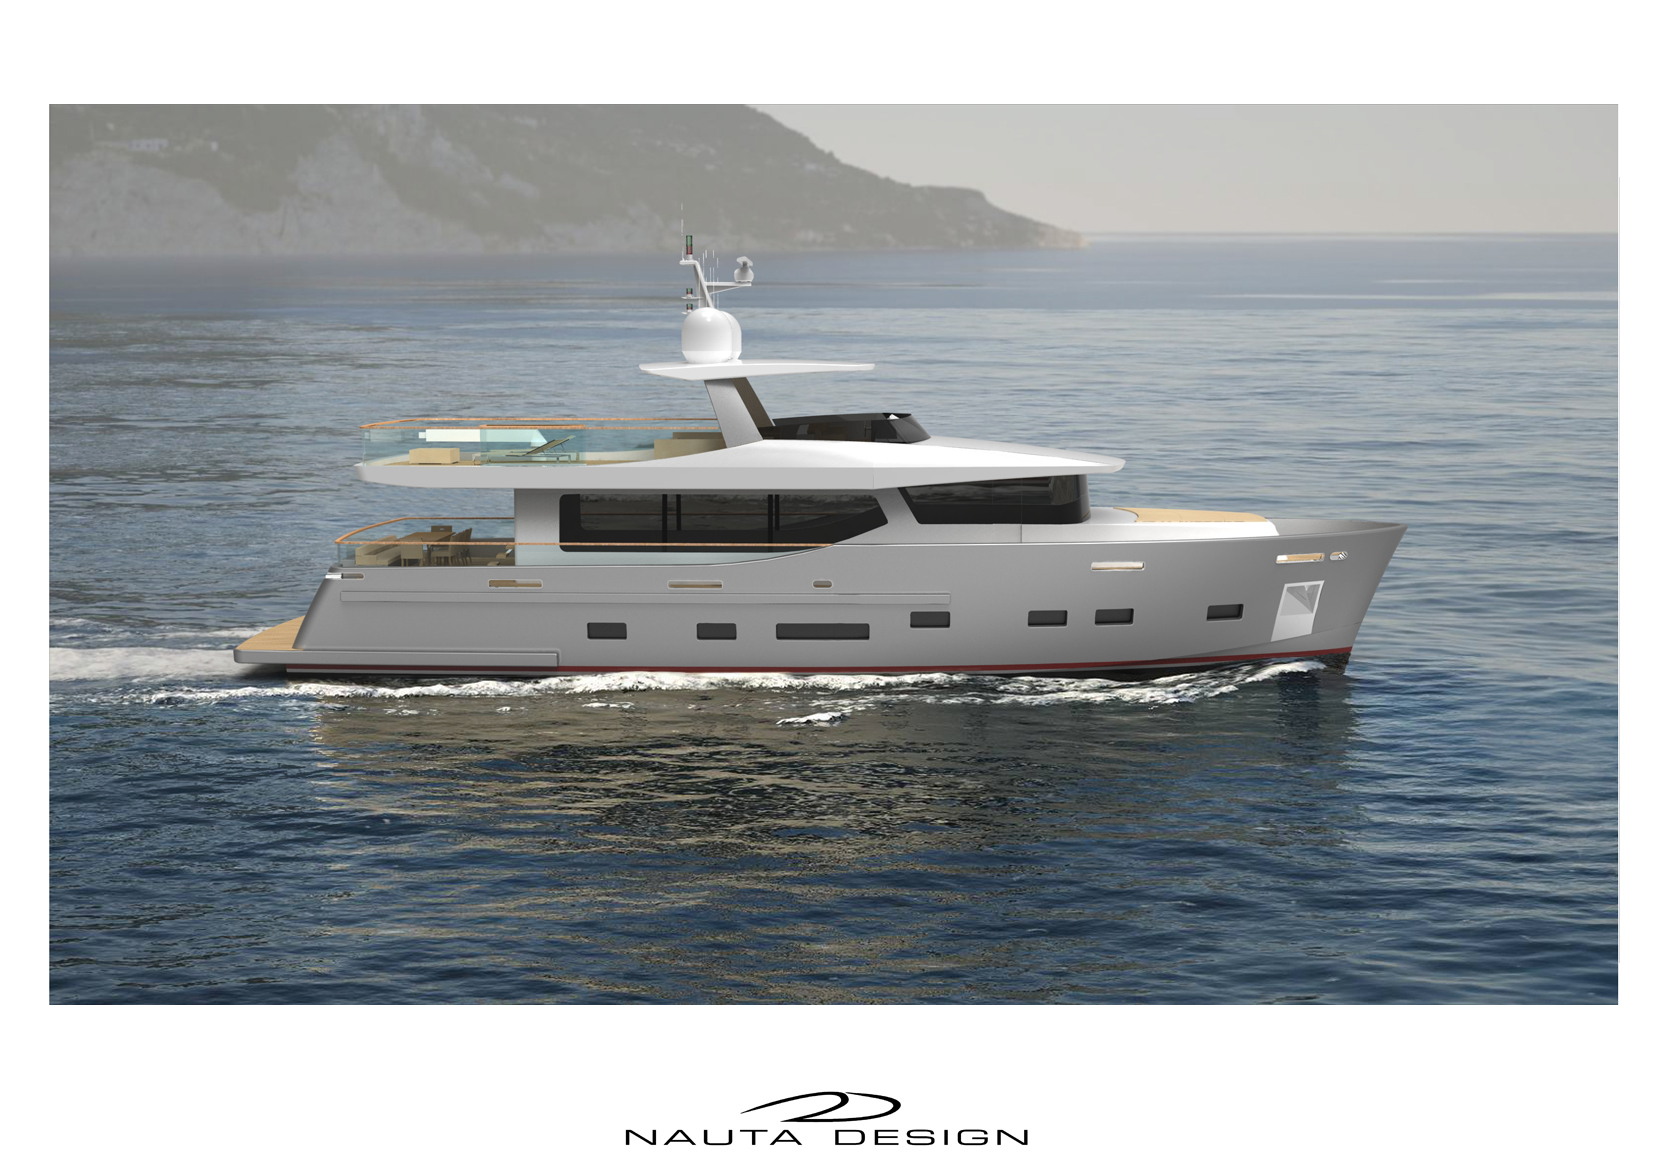 CdM Yachts and Nauta Yacht Design - The sale of the first motor yacht 